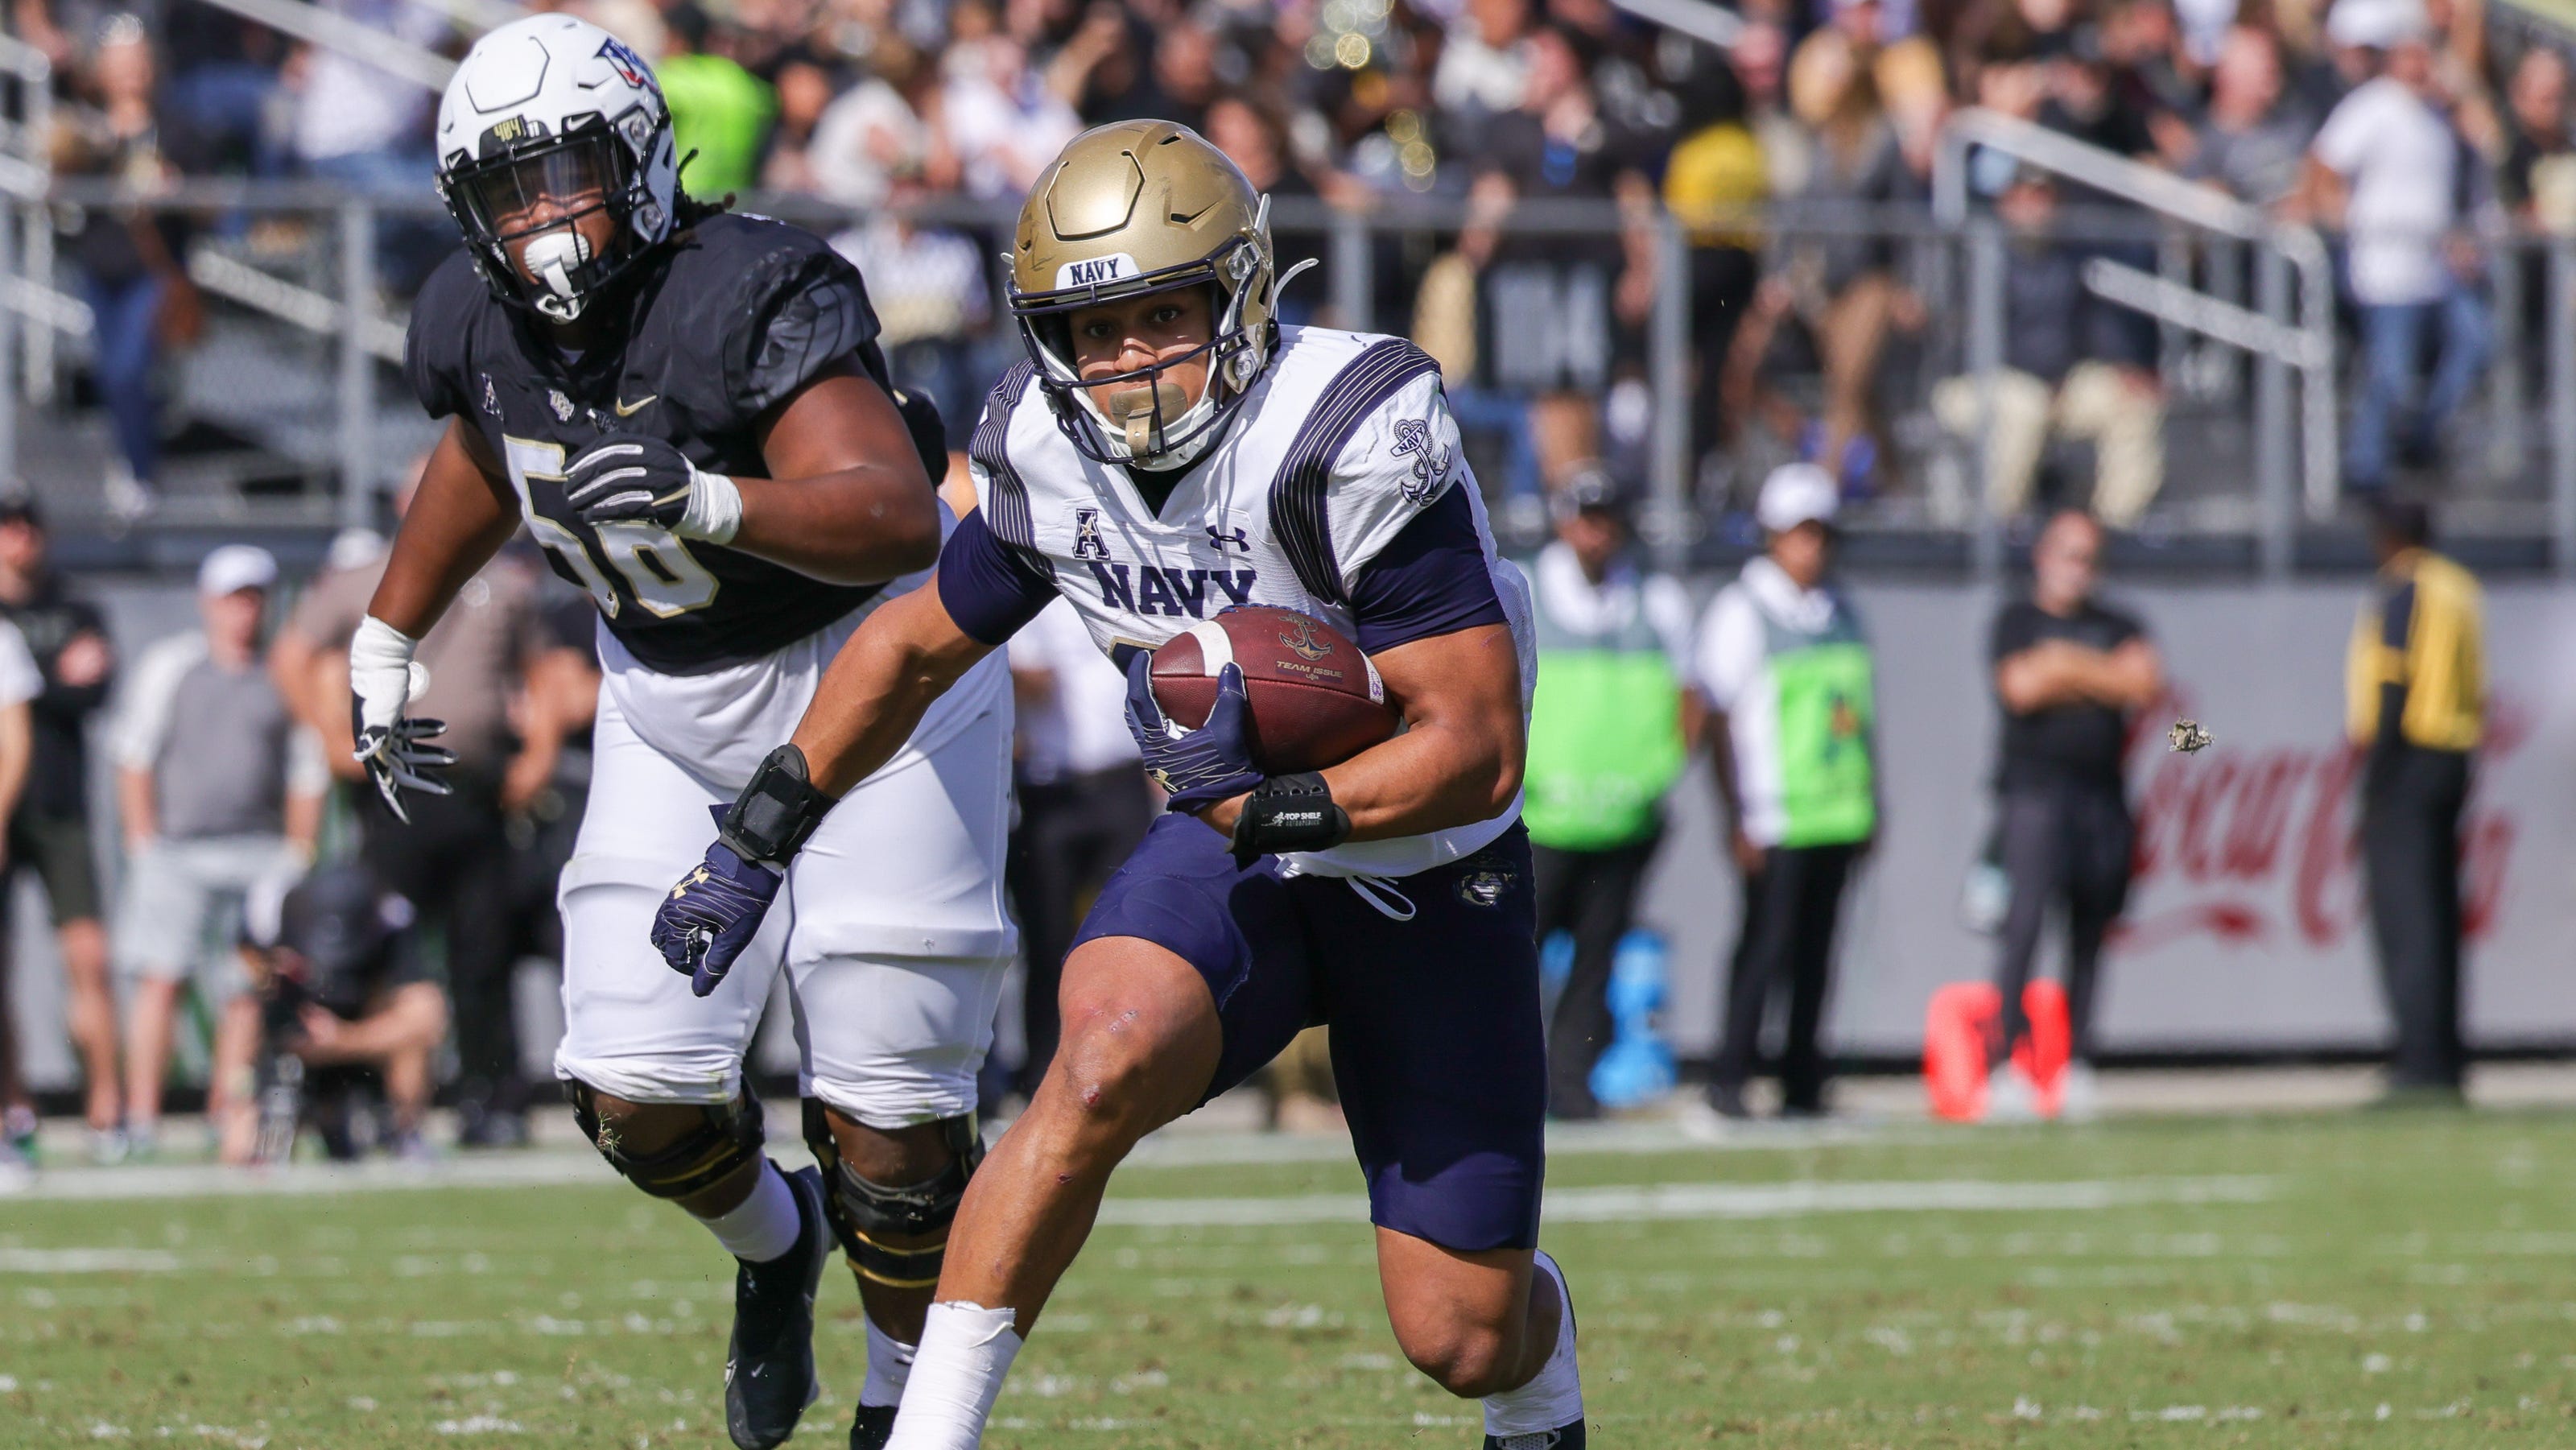 Navy shocks UCF 17-14, throws wrench into AAC championship picture. Here are 3 takeaways